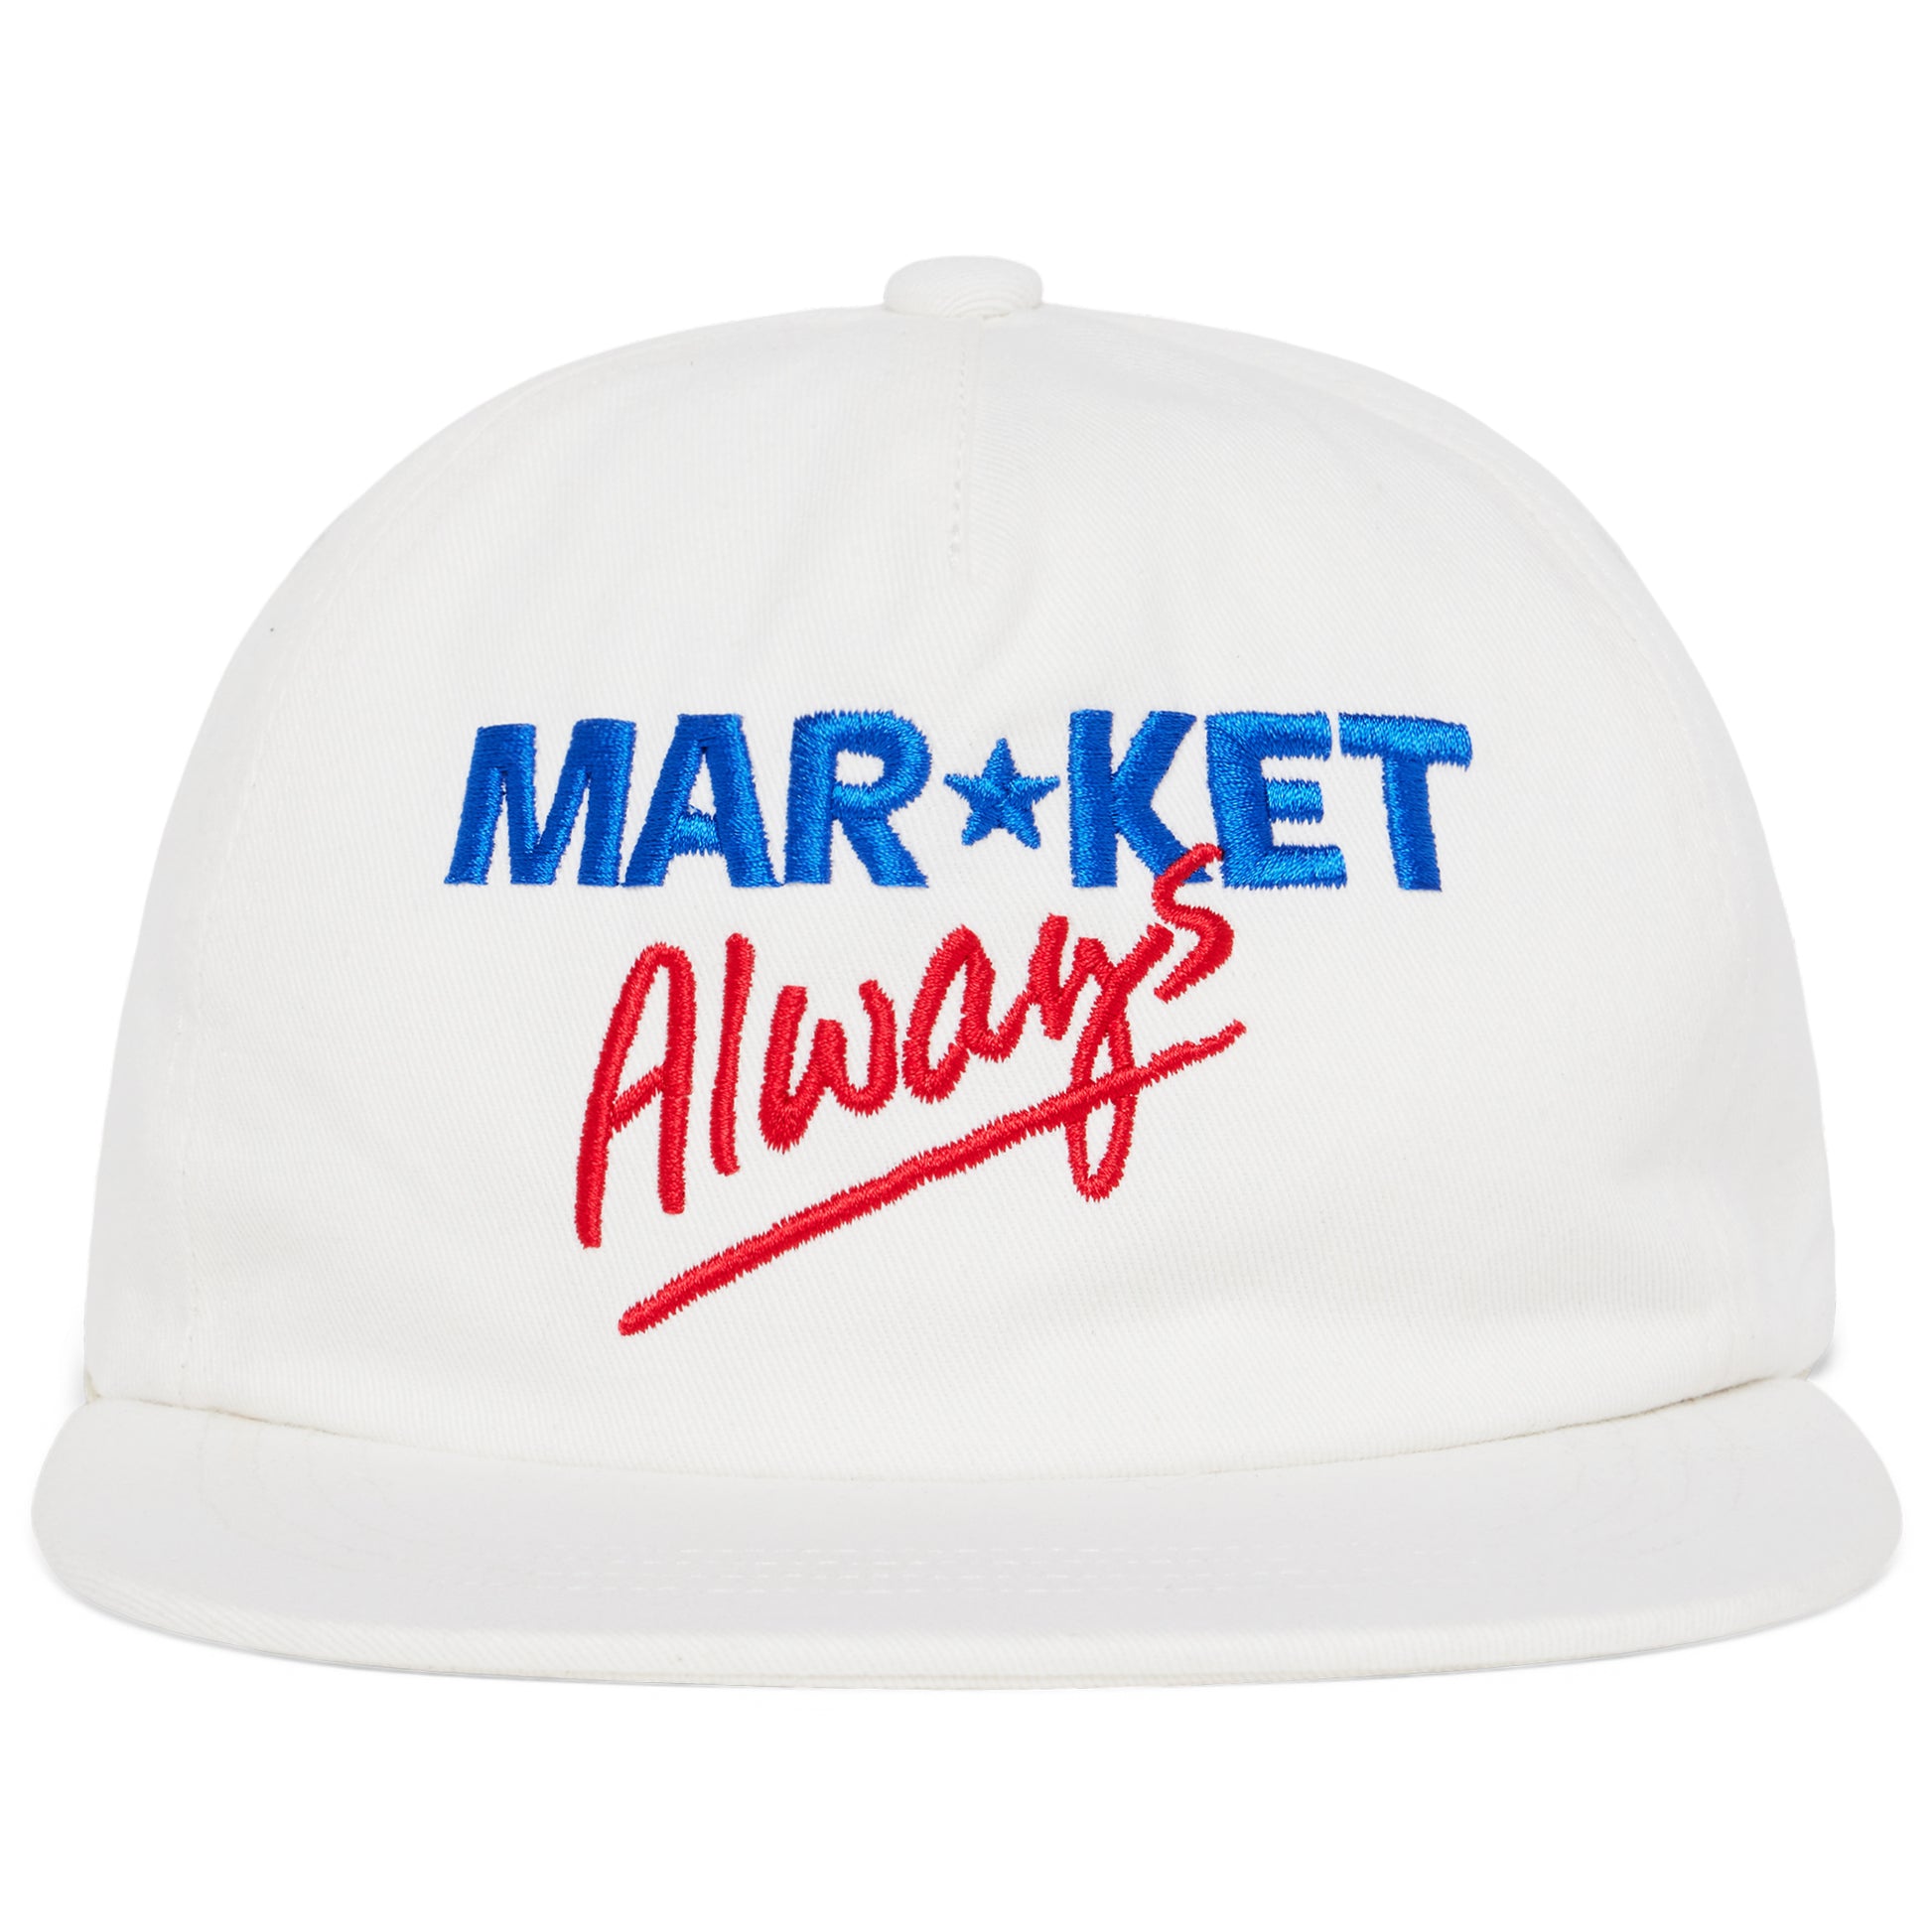 MARKET clothing brand LOW PRICES 5 PANEL HAT. Find more graphic tees, hats, beanies, hoodies at MarketStudios.com. Formally Chinatown Market. 